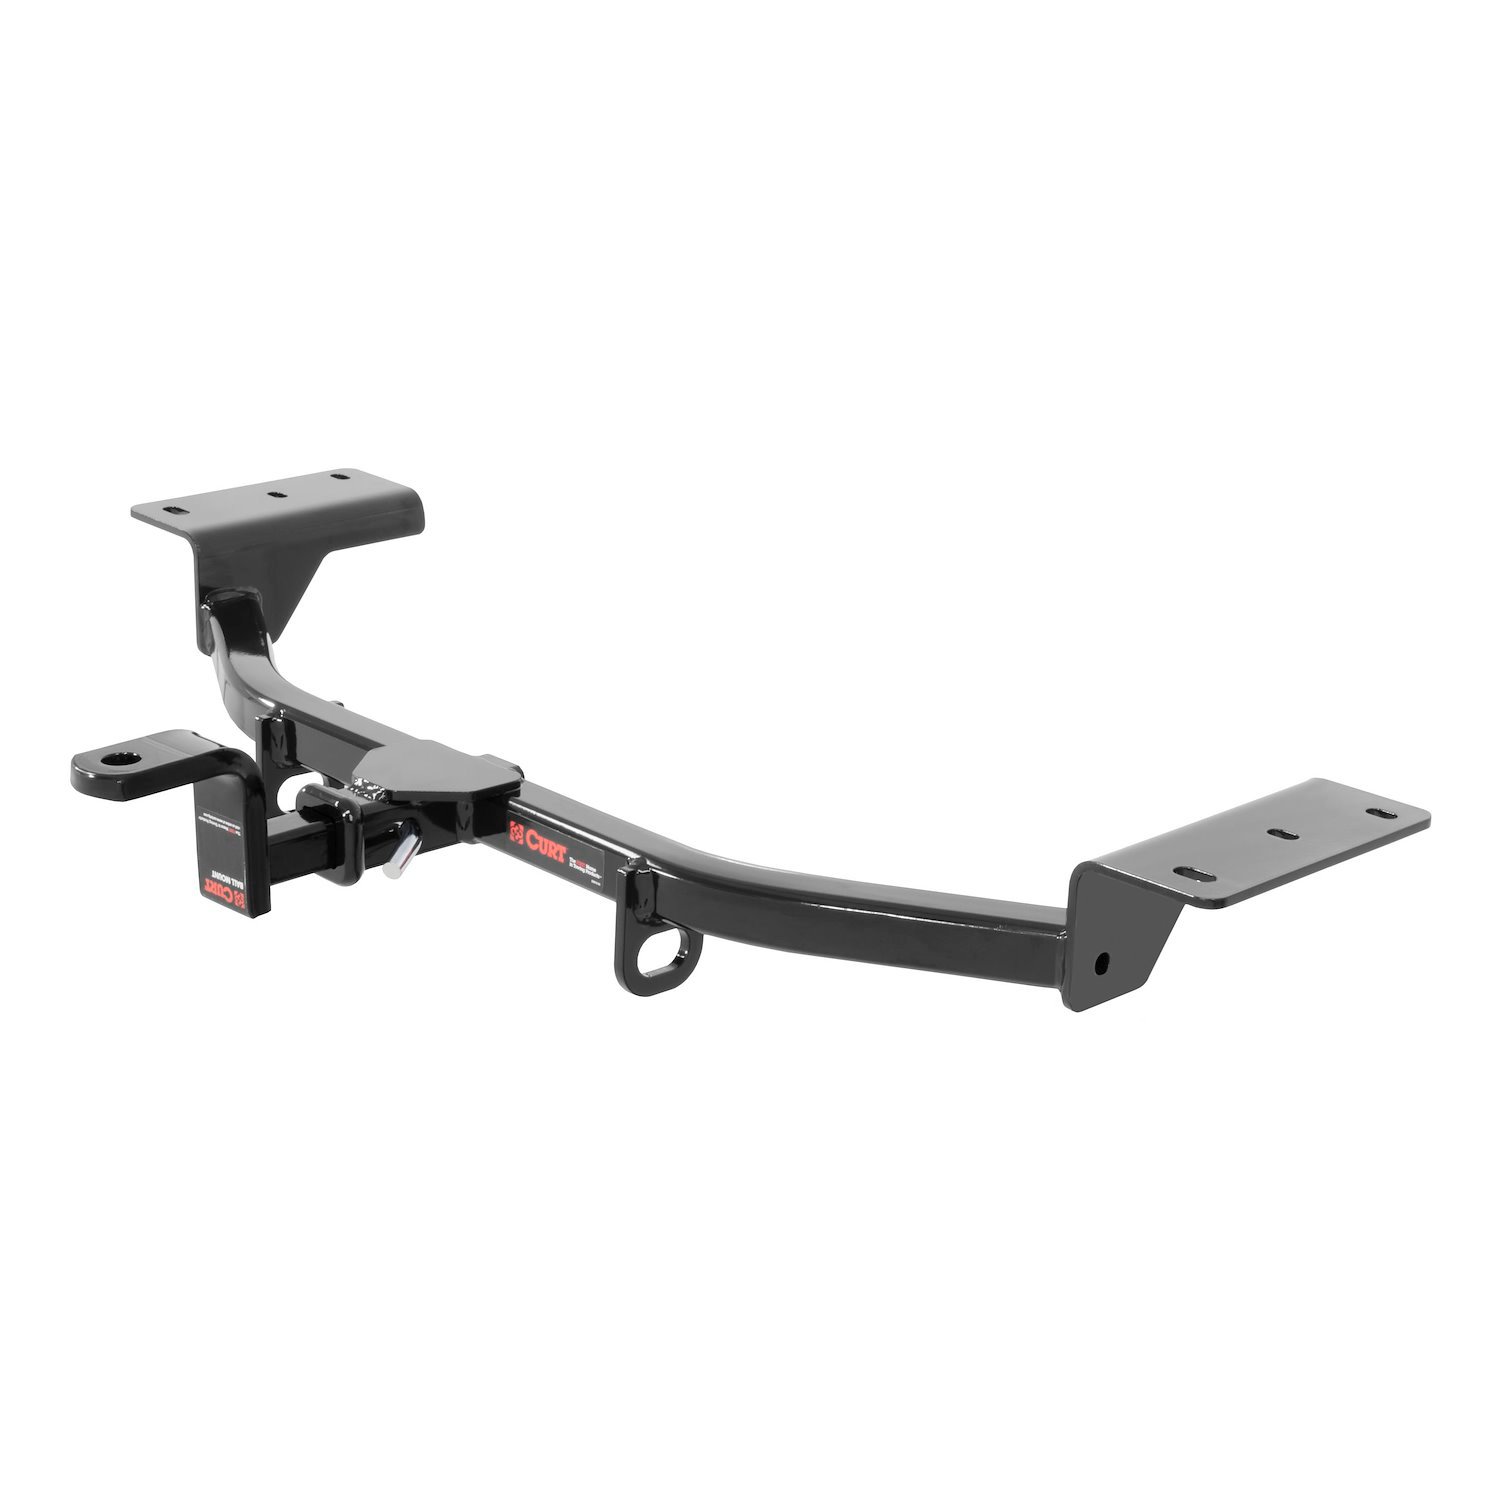 Class 1 Trailer Hitch with Ball Mount